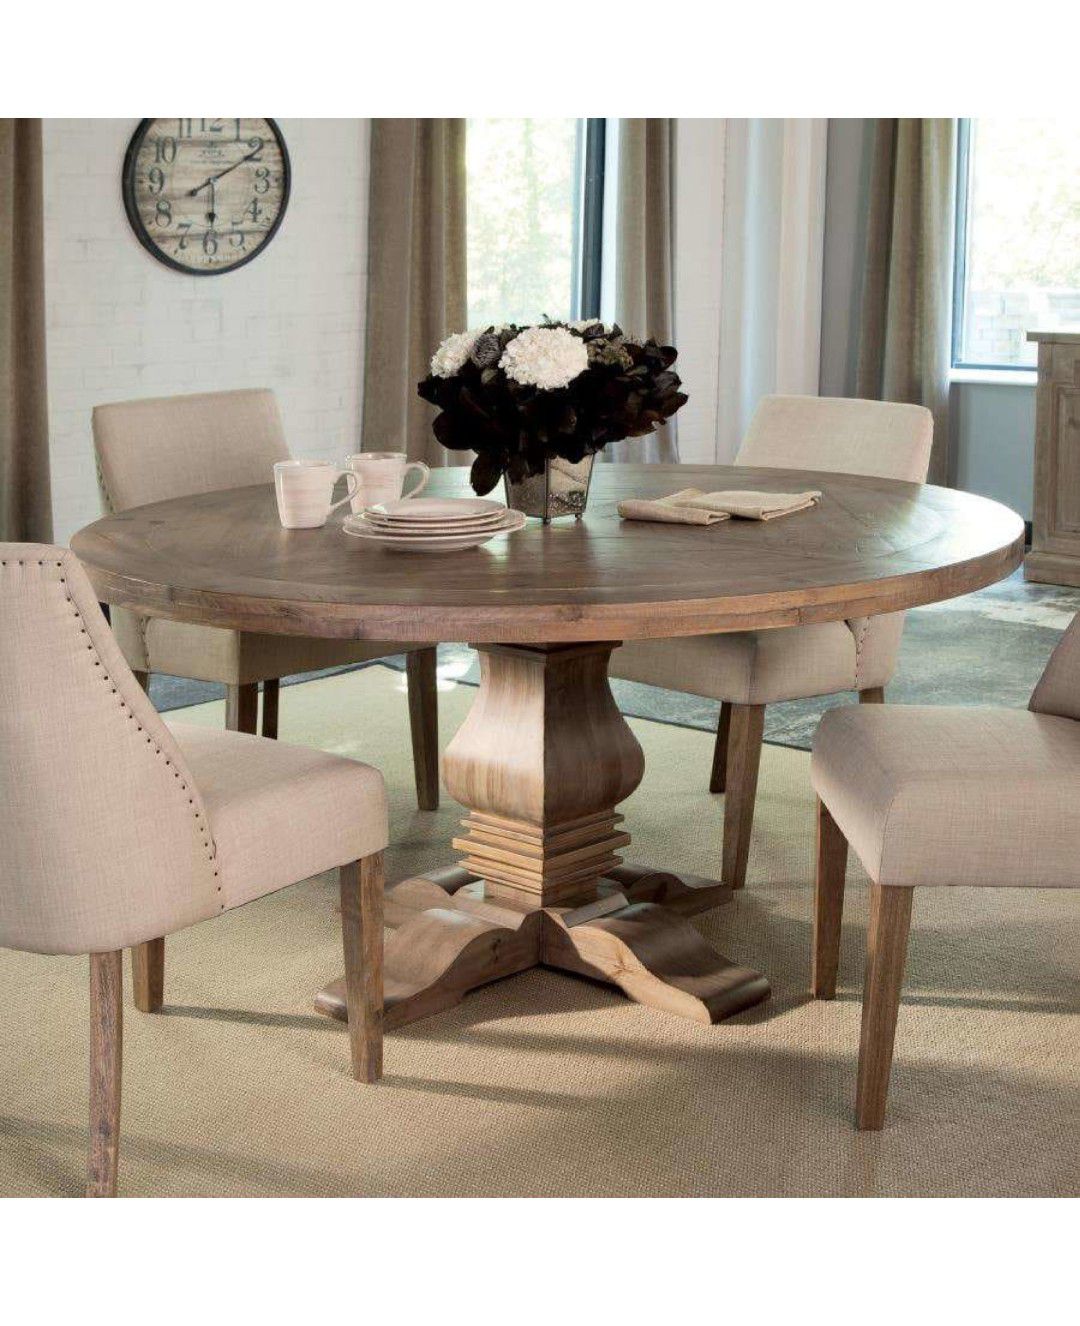 Round wooden dining table w/ hairpin legs